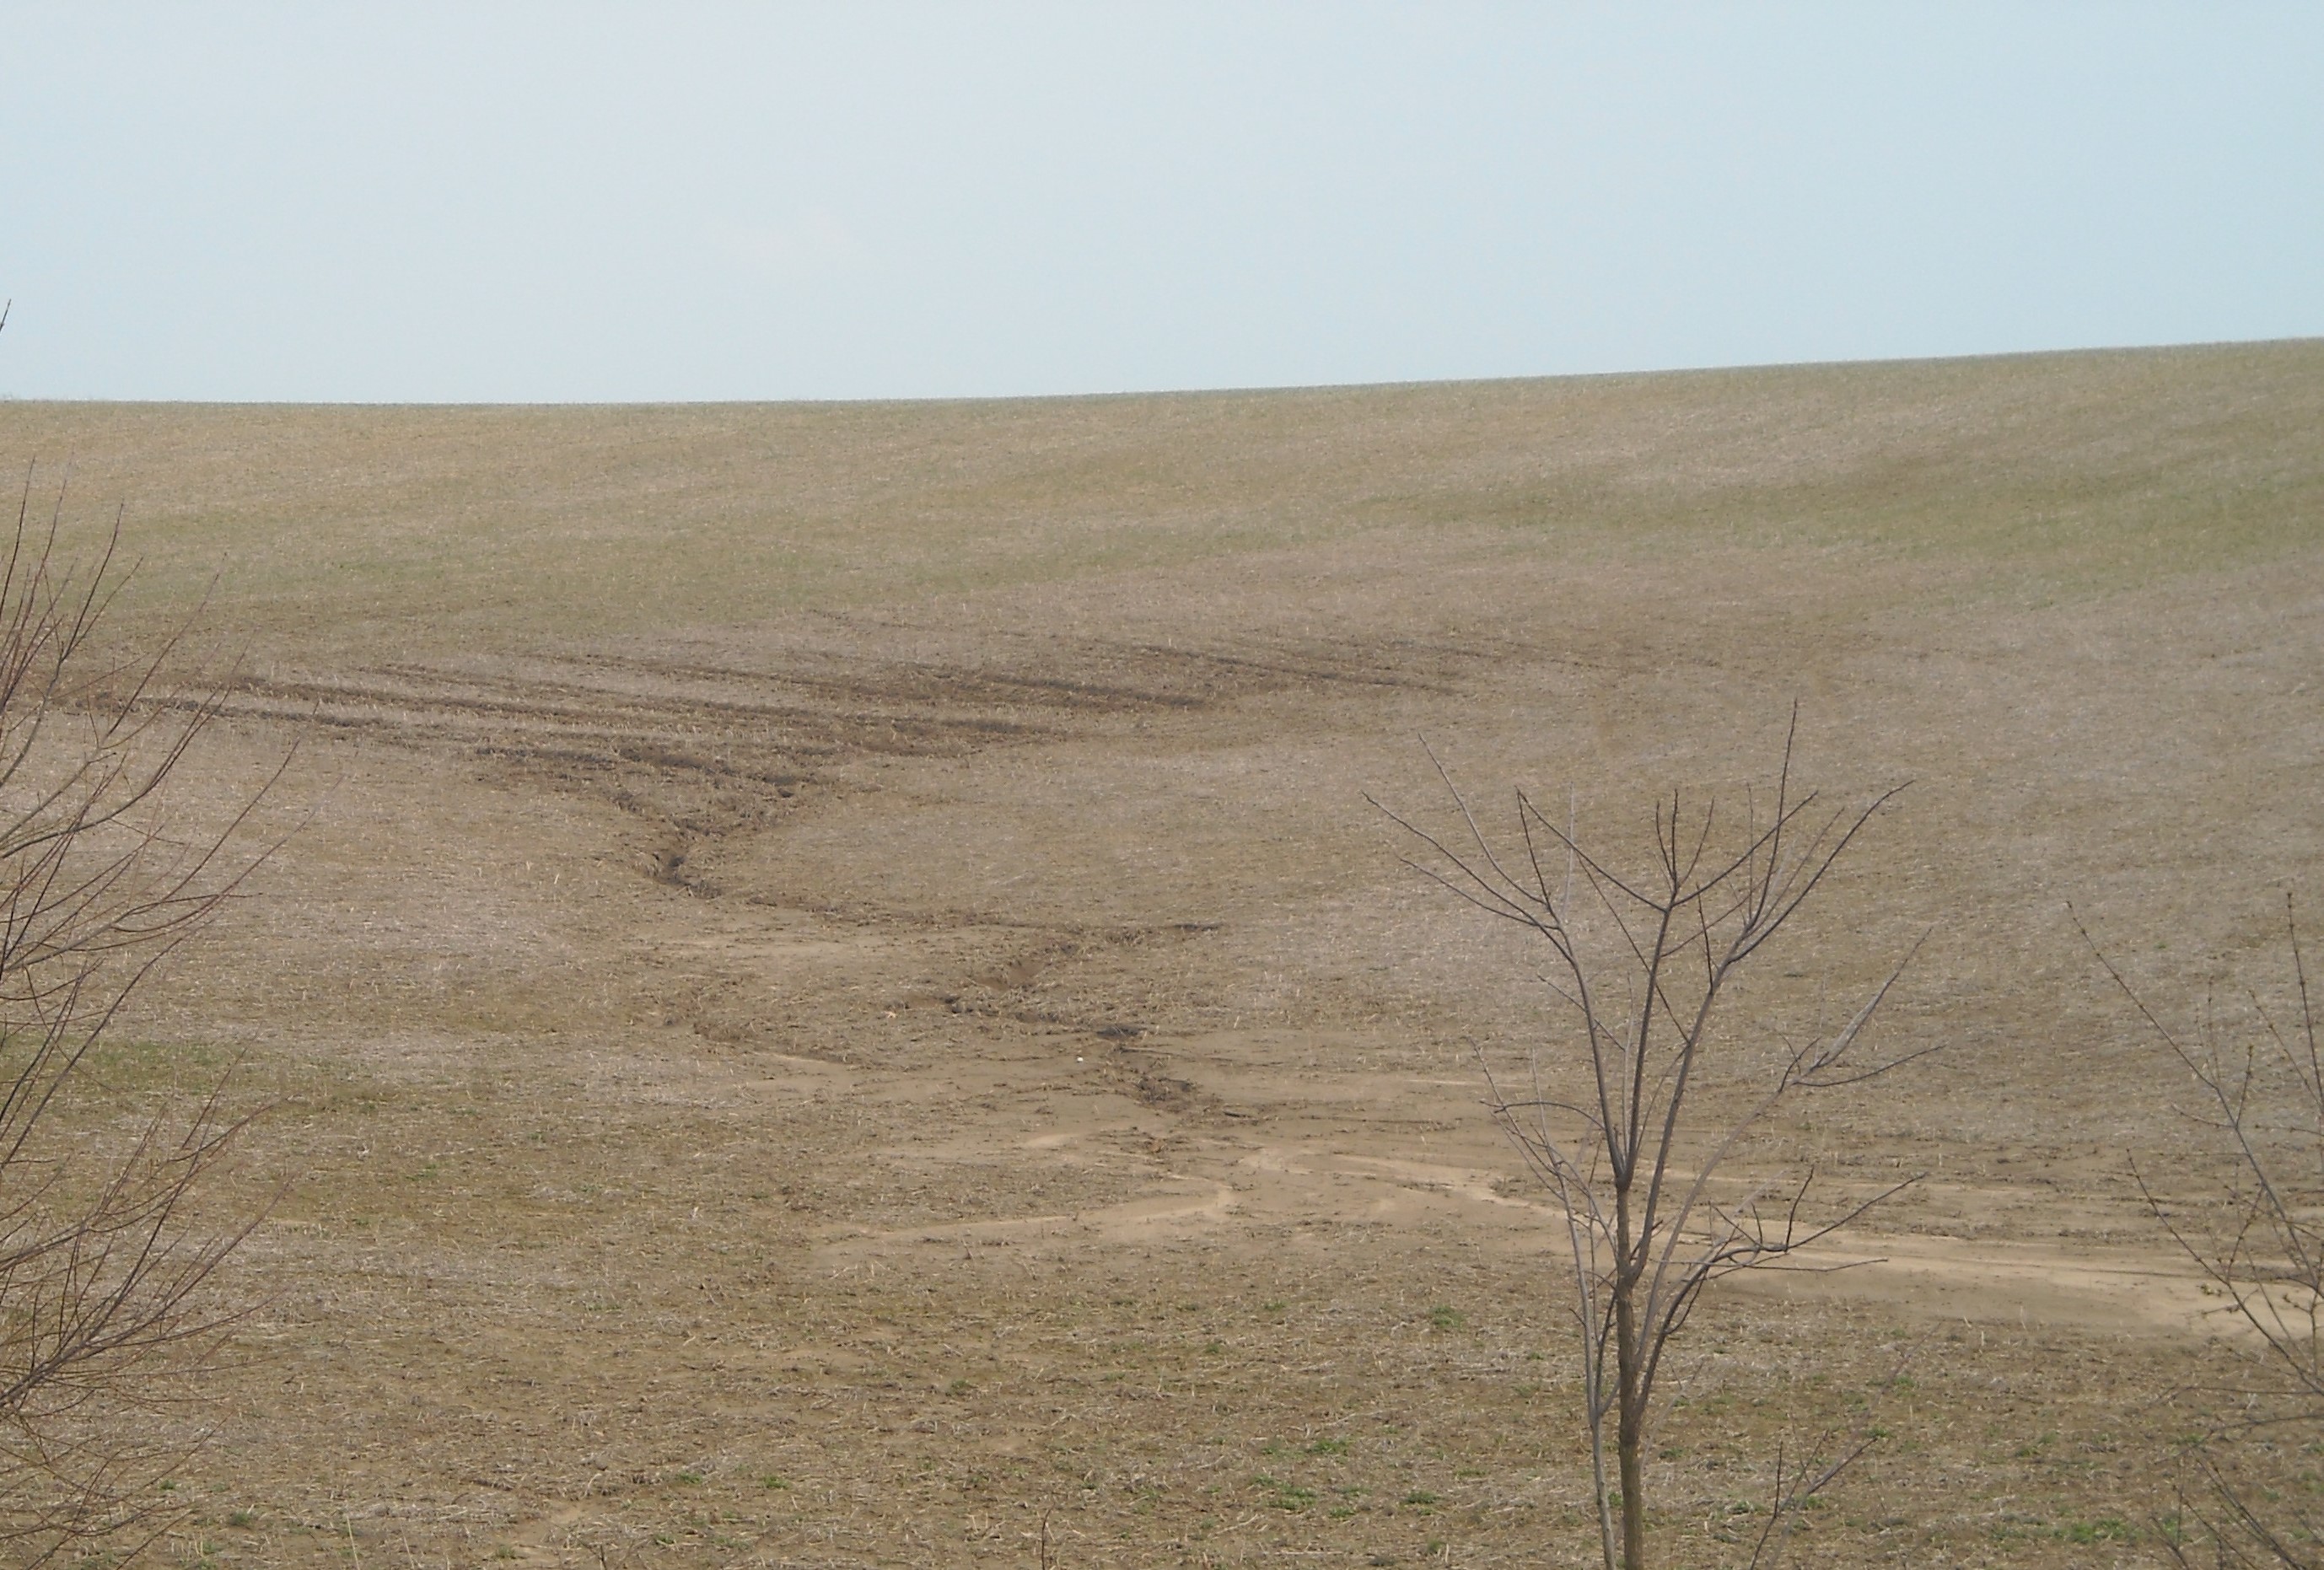 A harvested field with an obvious path where the surface water runoff has been flowing